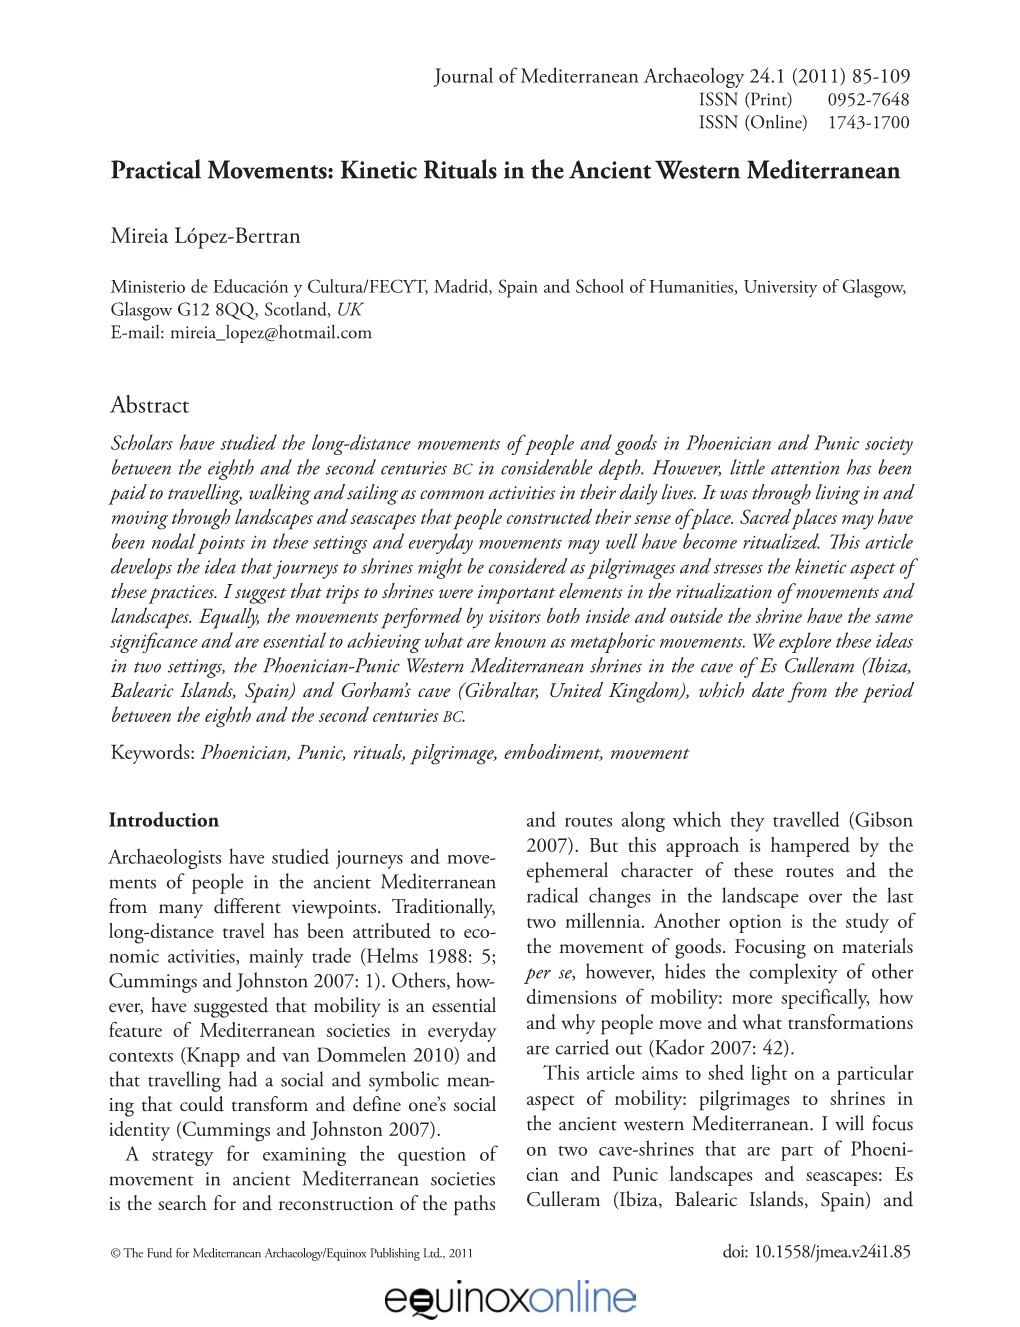 Practical Movements: Kinetic Rituals in the Ancient Western Mediterranean